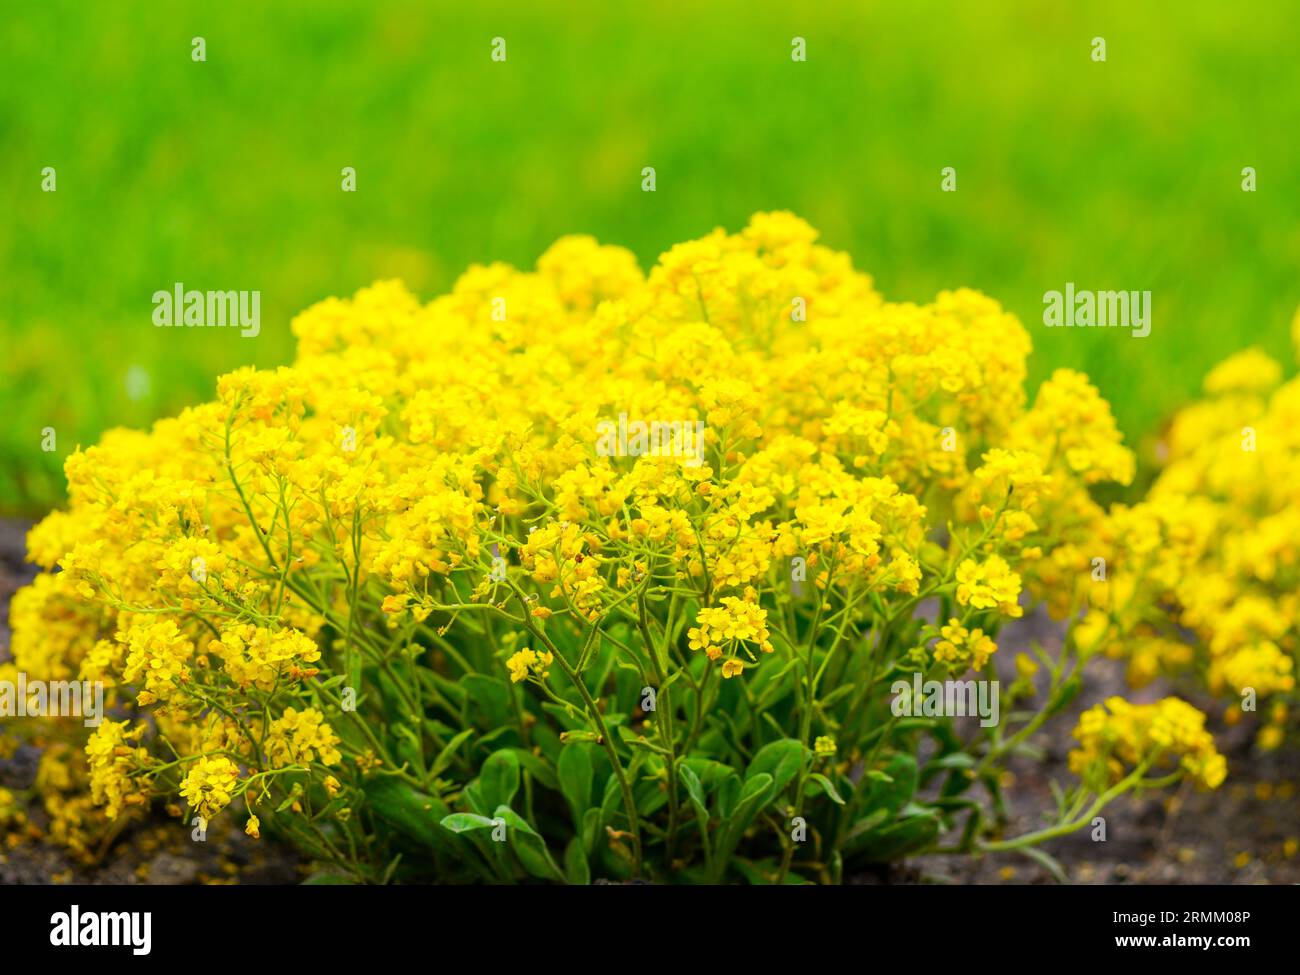 Flowering Rock Alyssum. Plant with yellow flowers close-up. Perennial in the garden bed. Aurinia saxatilis. Stock Photo